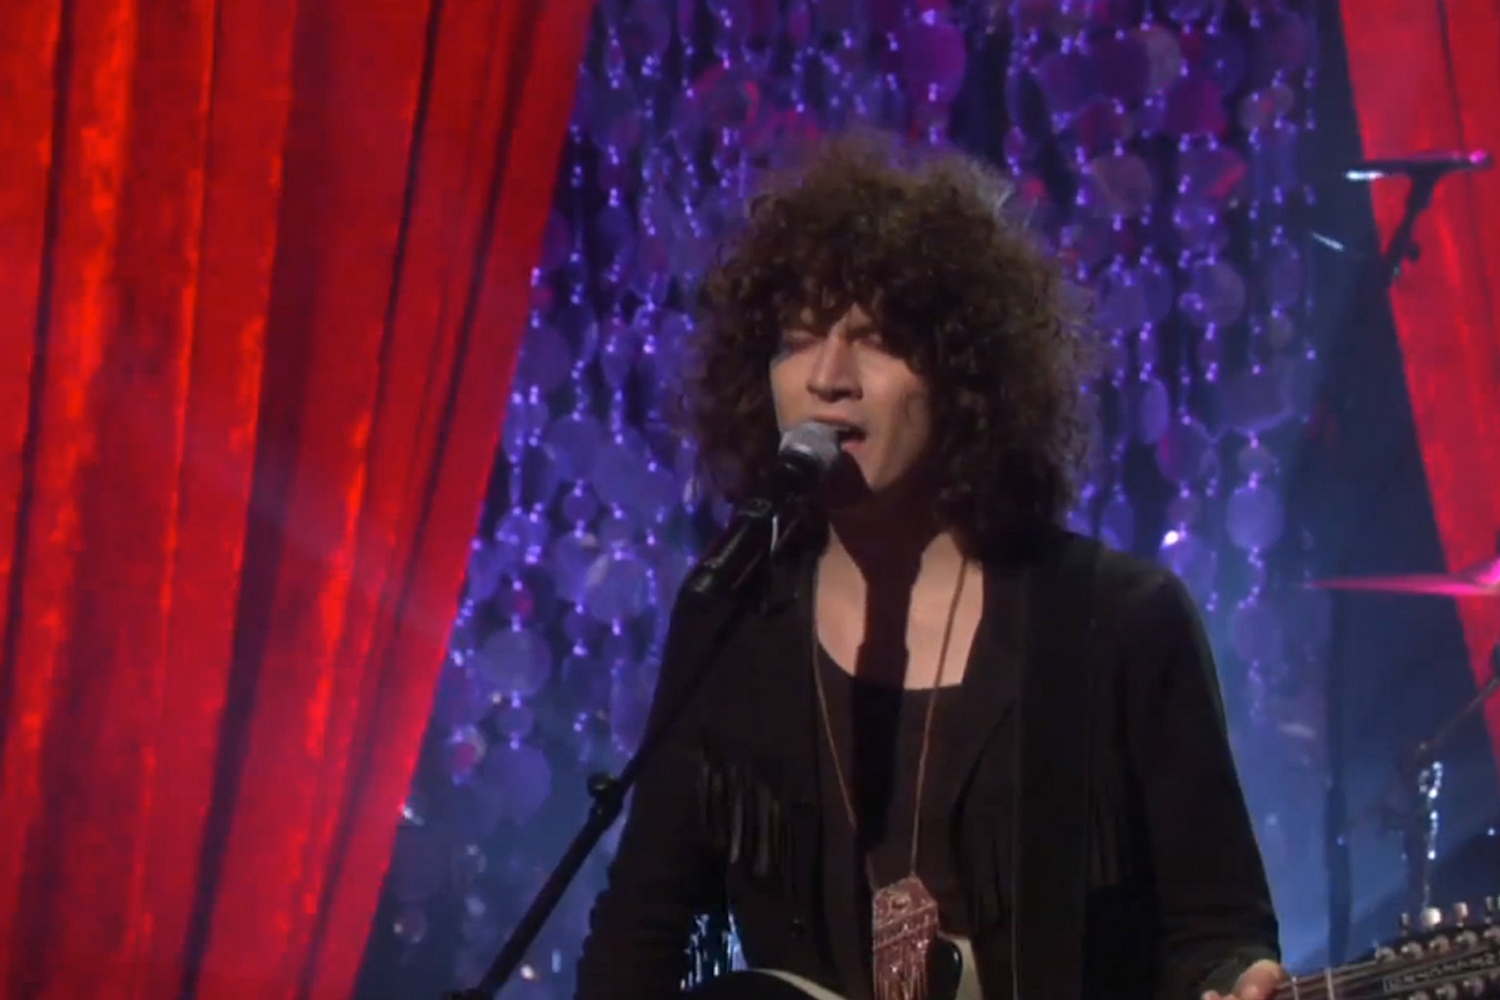 Watch Temples perform ‘Shelter Song’ on Ellen